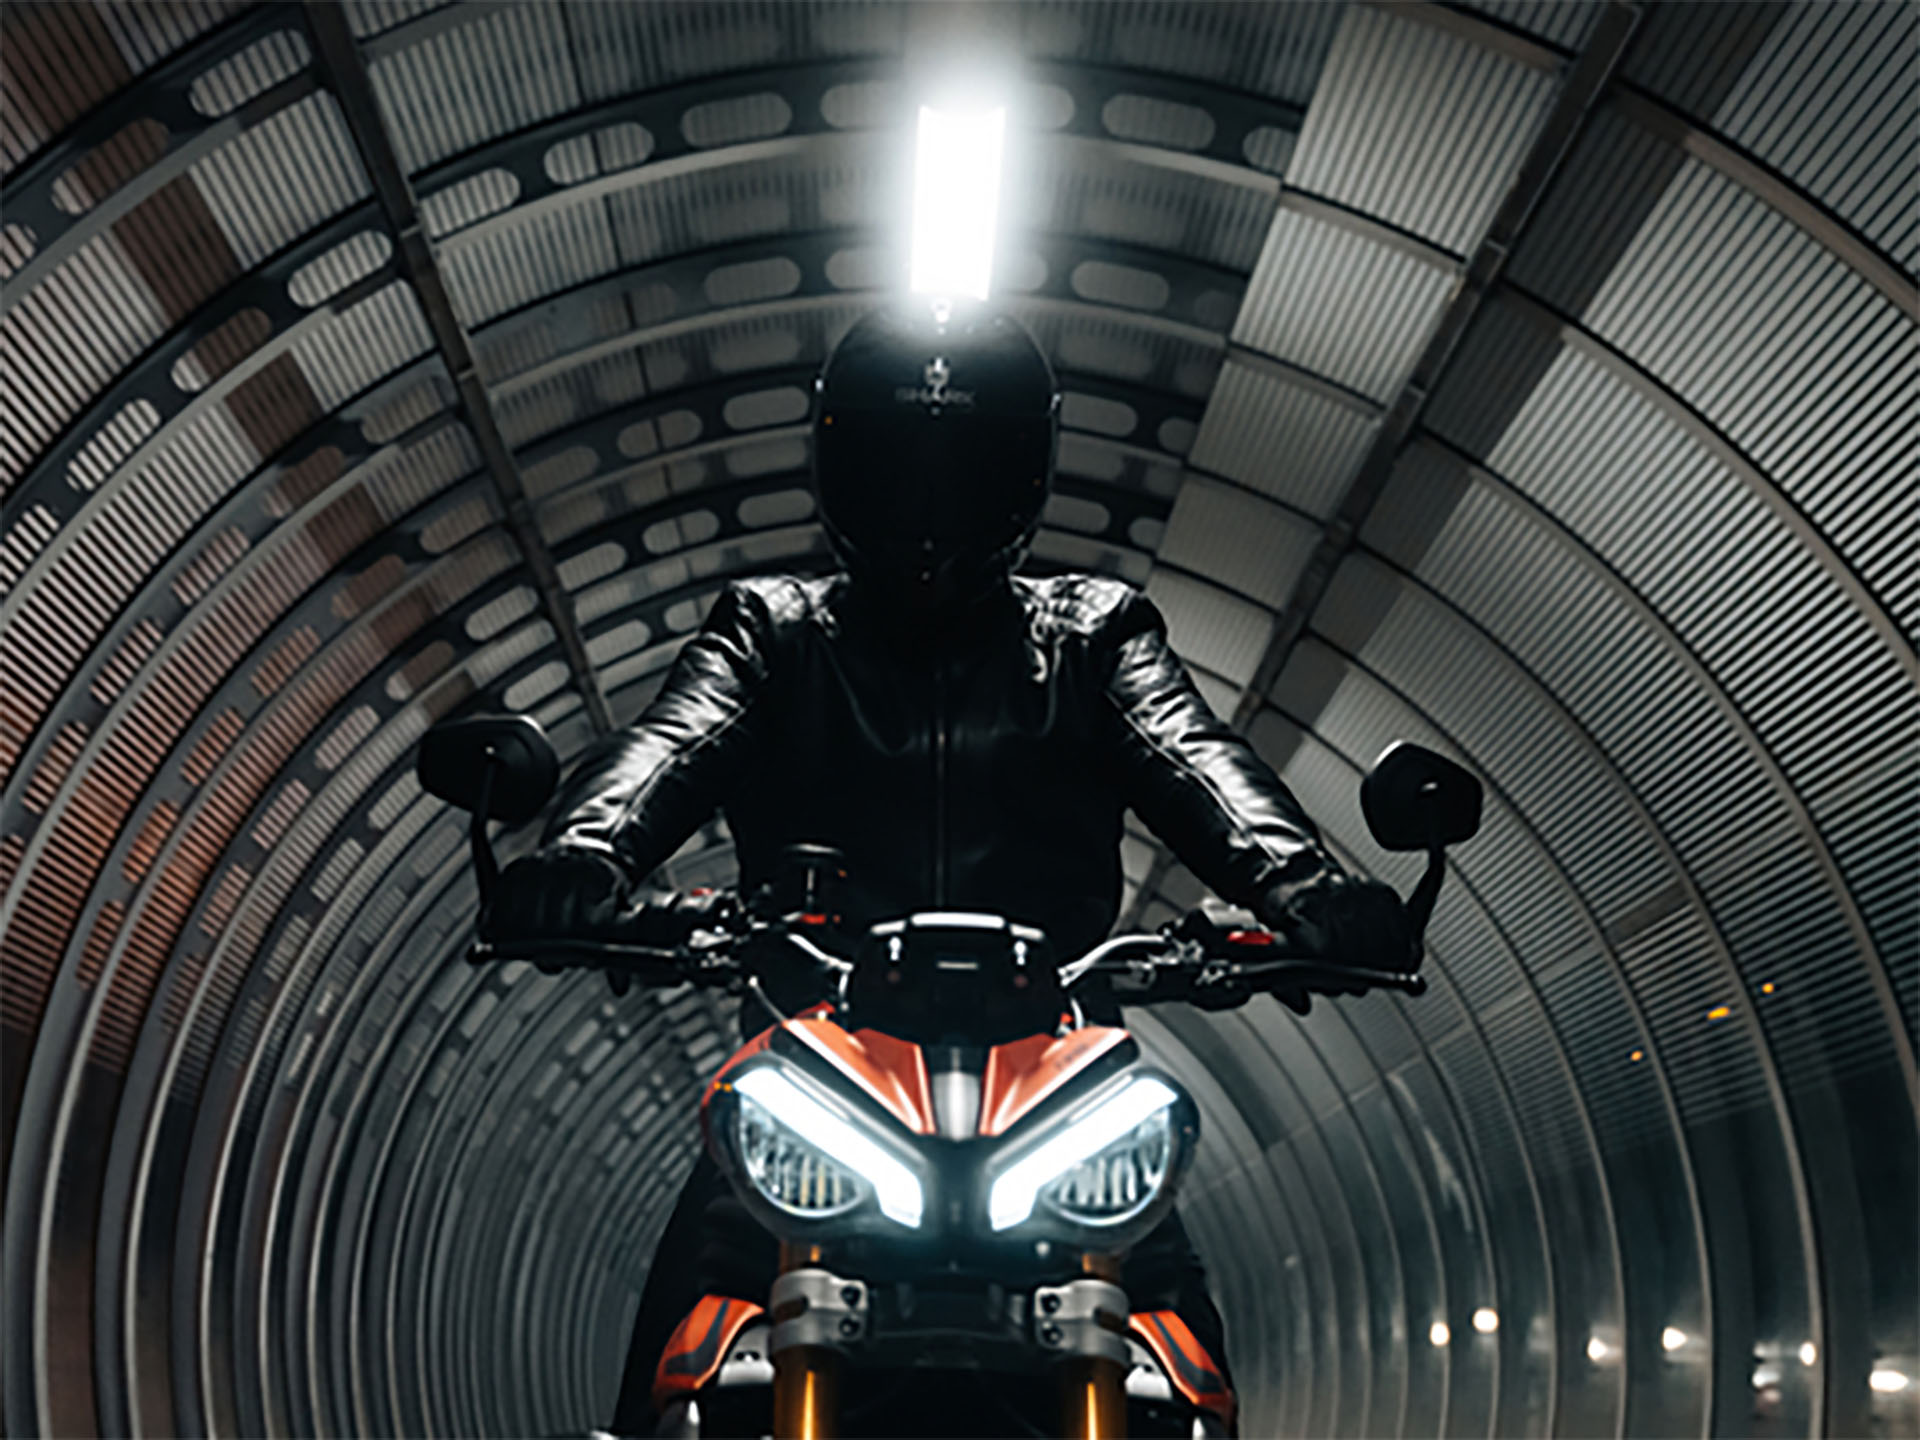 2023 Triumph SPEED TRIPLE - 1200 RS for sale in the Pompano Beach, FL area. Get the best drive out price on 2023 Triumph SPEED TRIPLE - 1200 RS and compare.